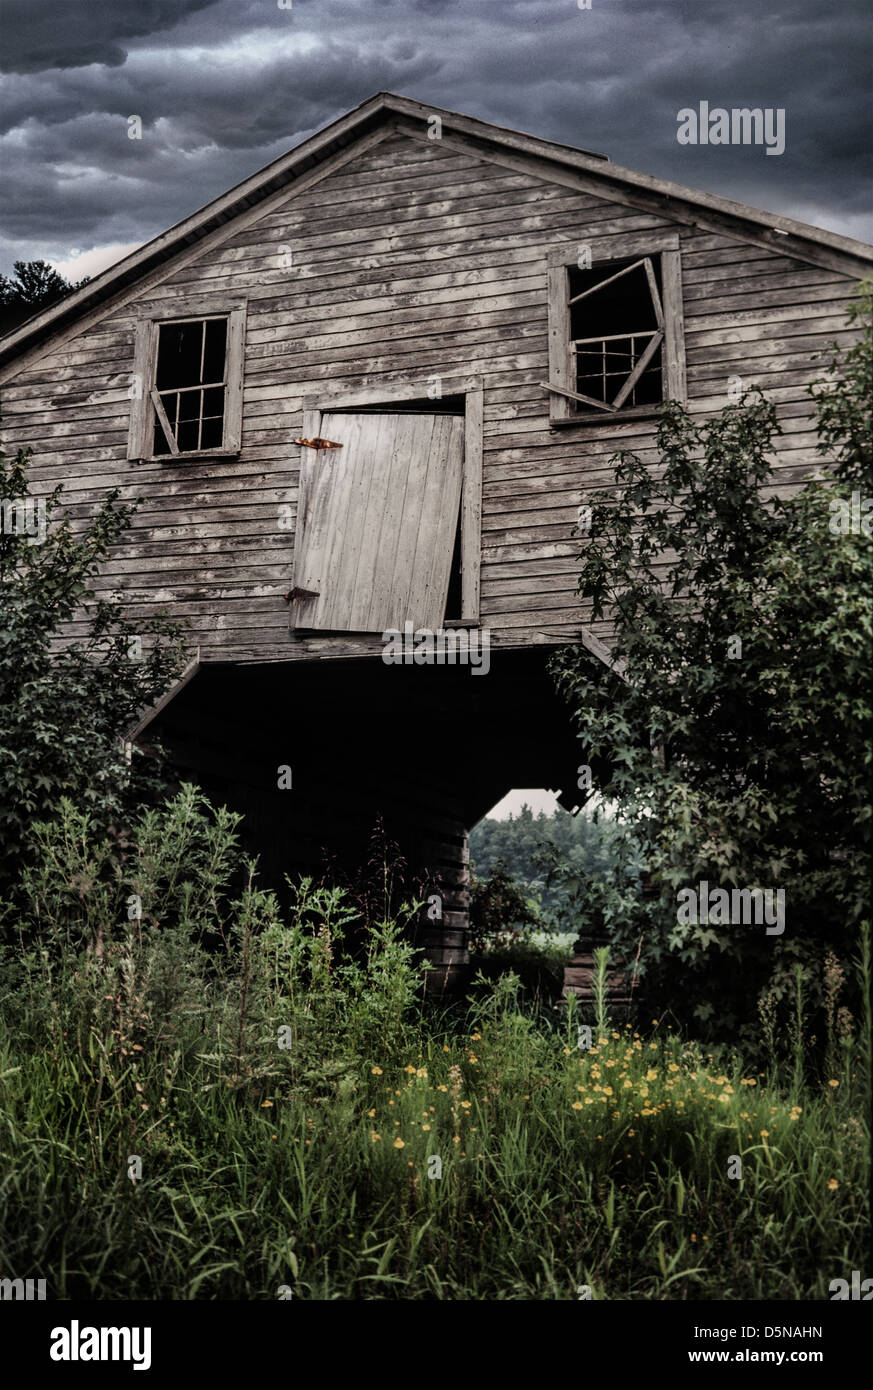 Dilapidated barn with storm clouds Stock Photo